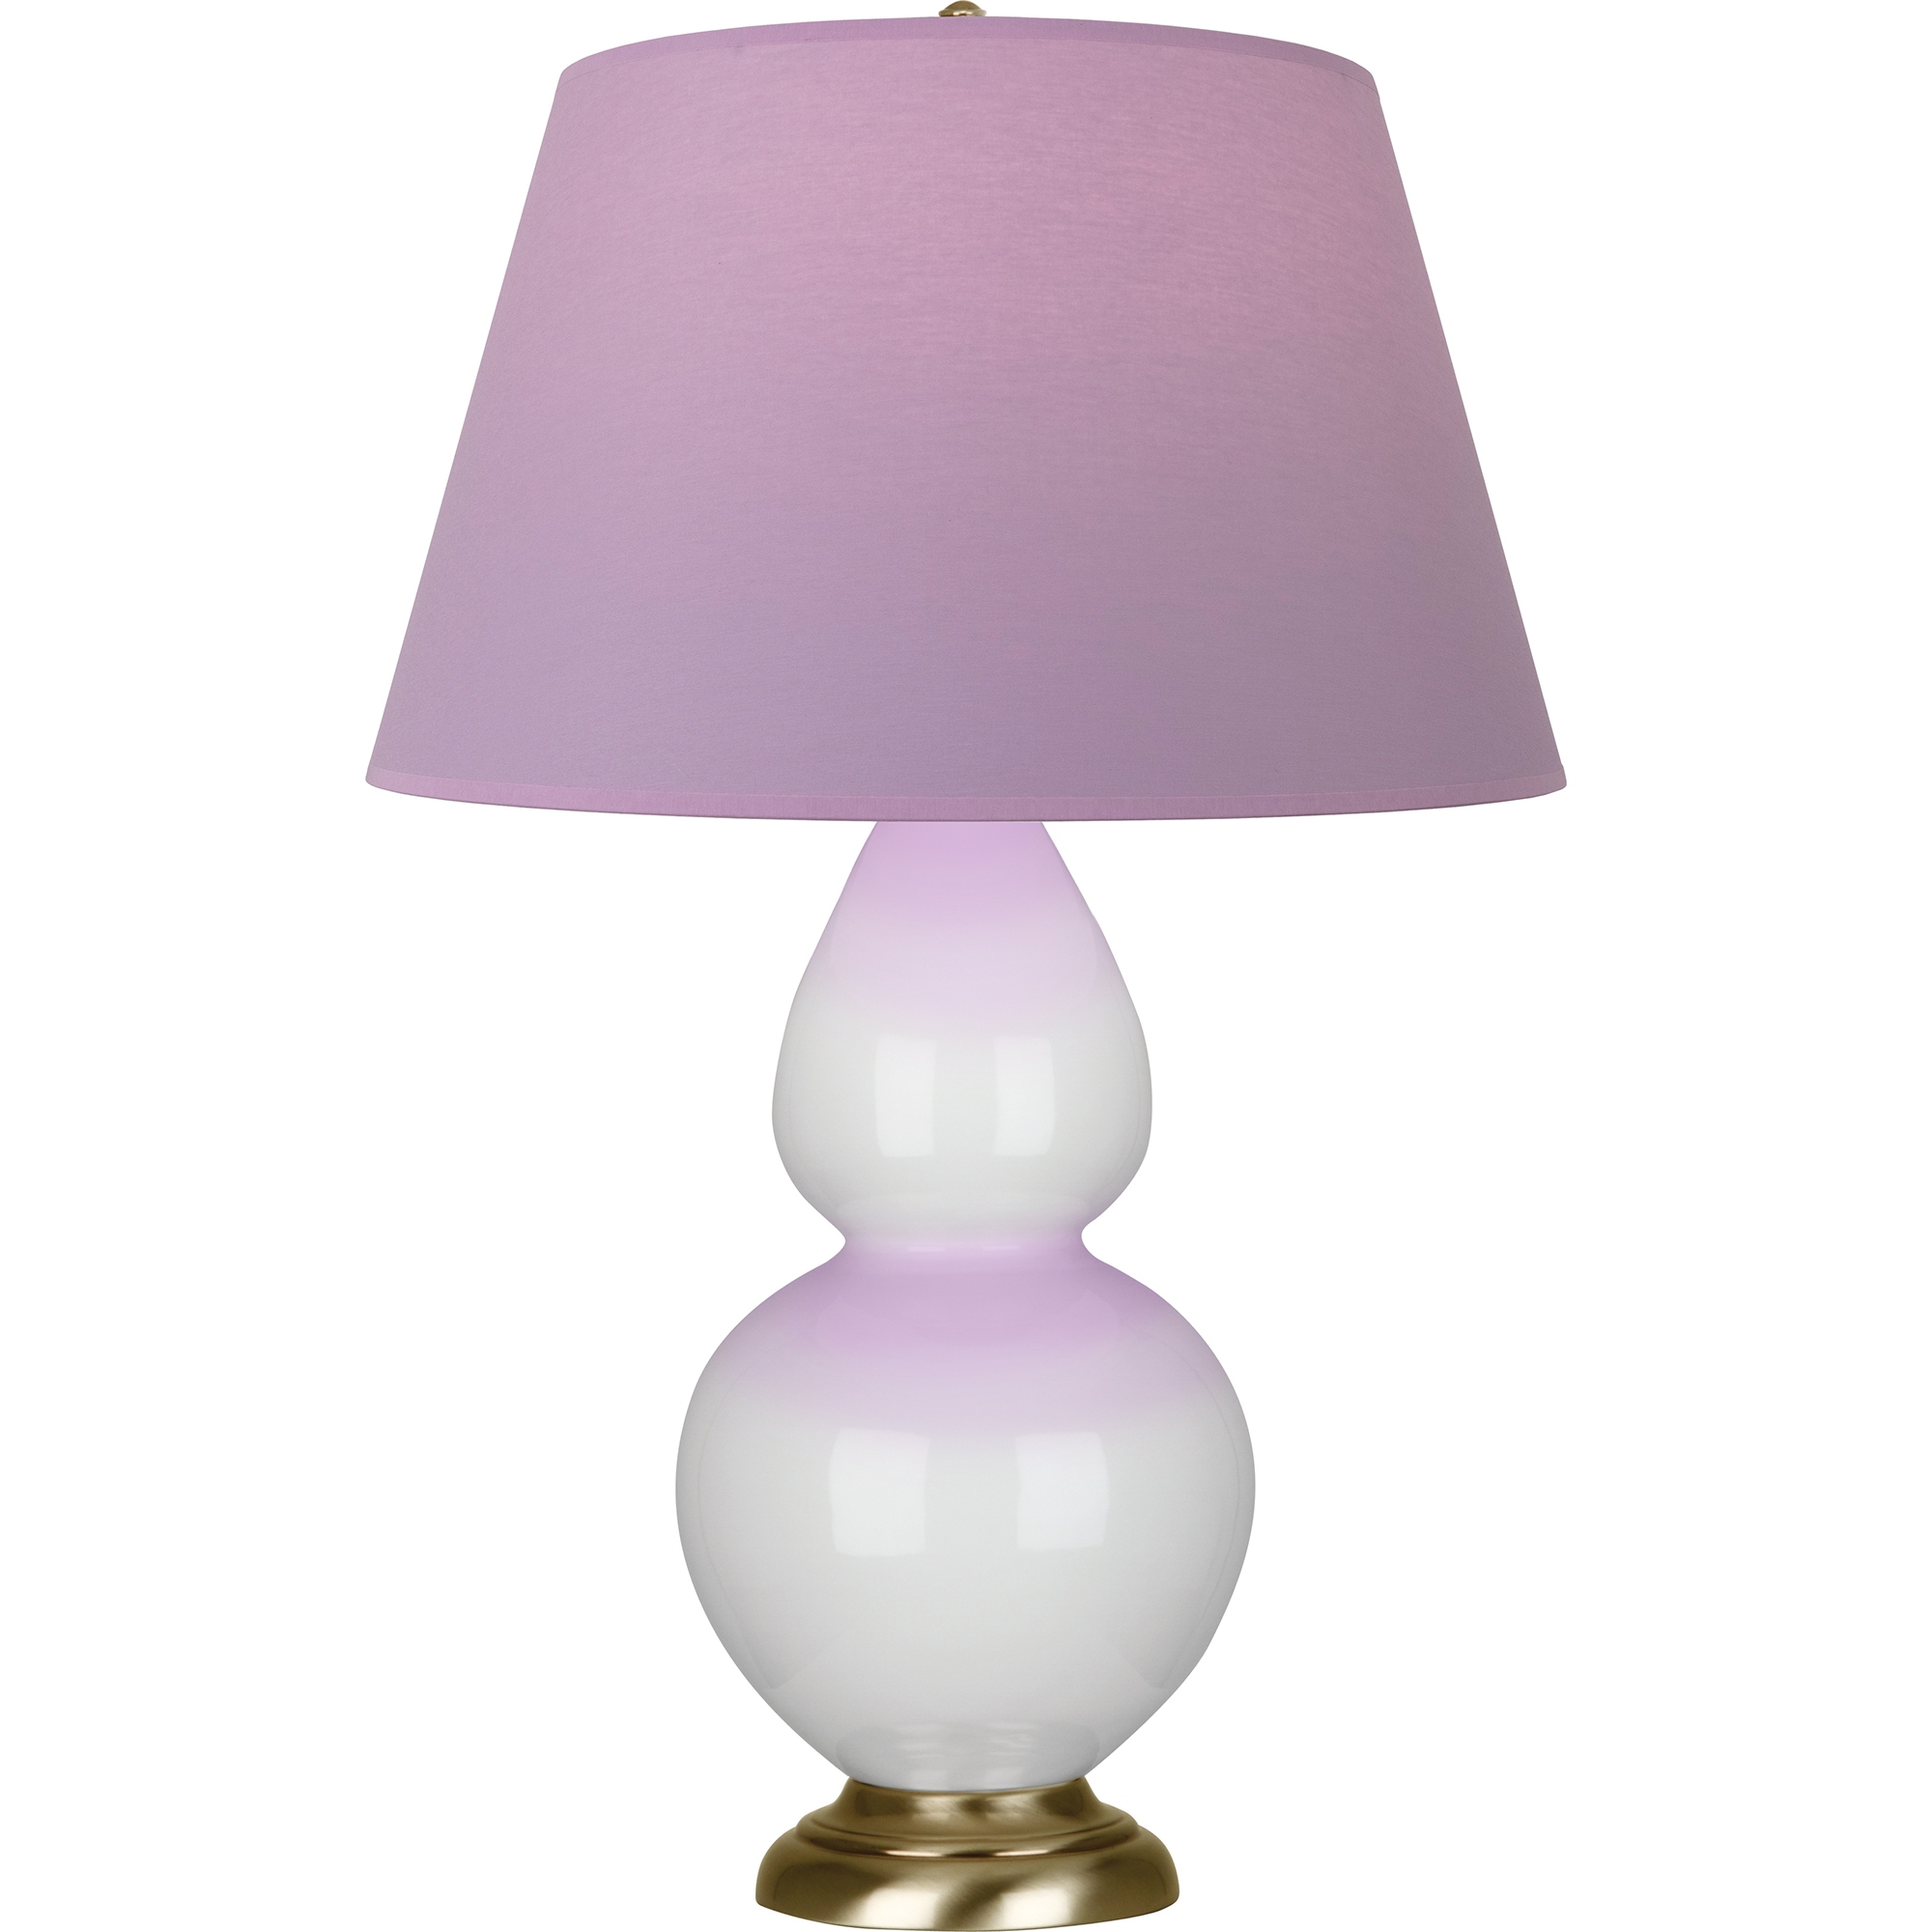 Double Gourd Table Lamp Style #1660L